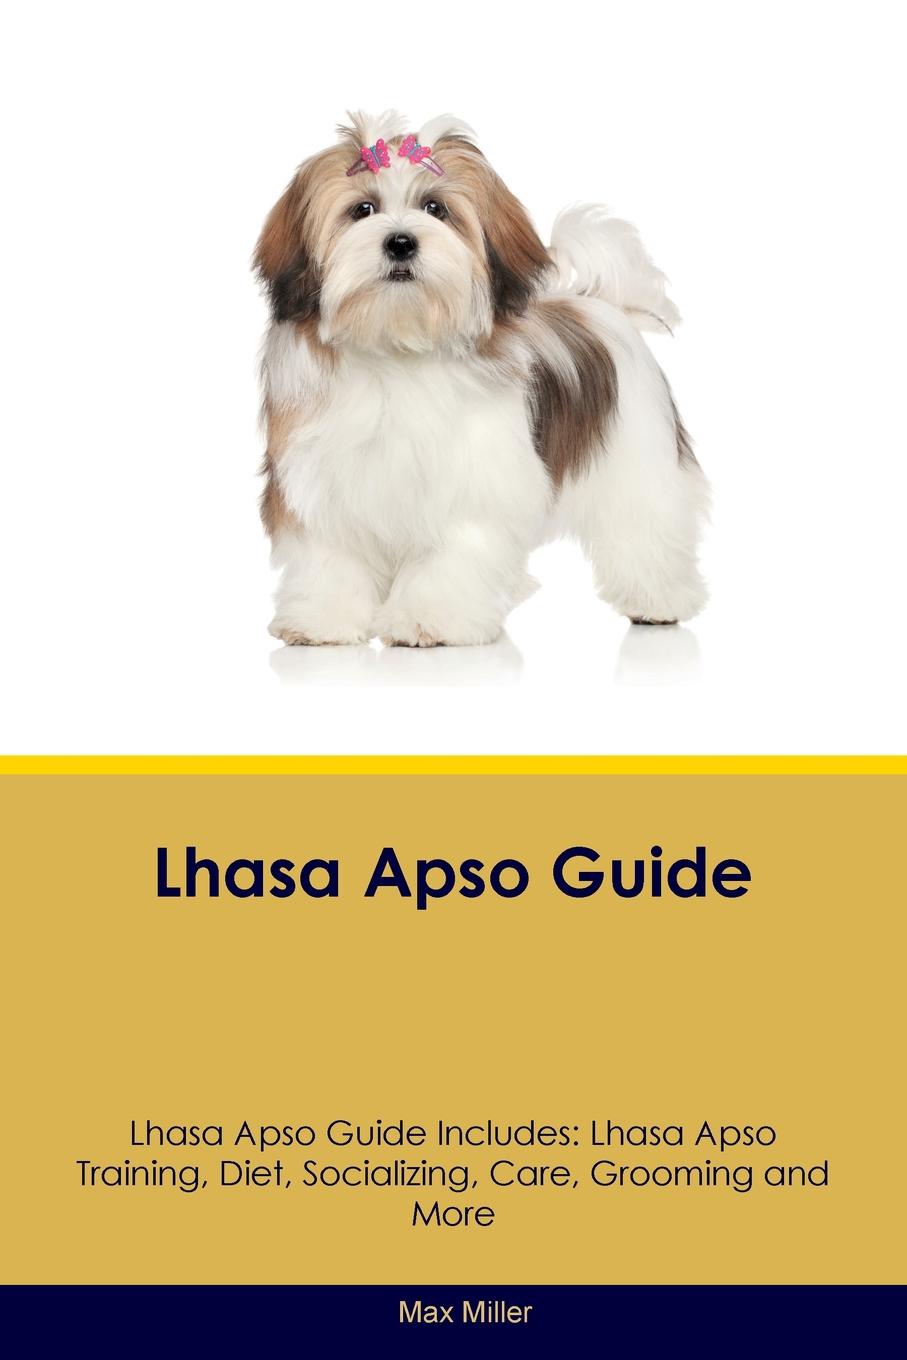 Lhasa Apso Guide Lhasa Apso Guide Includes. Lhasa Apso Training, Diet, Socializing, Care, Grooming, Breeding and More